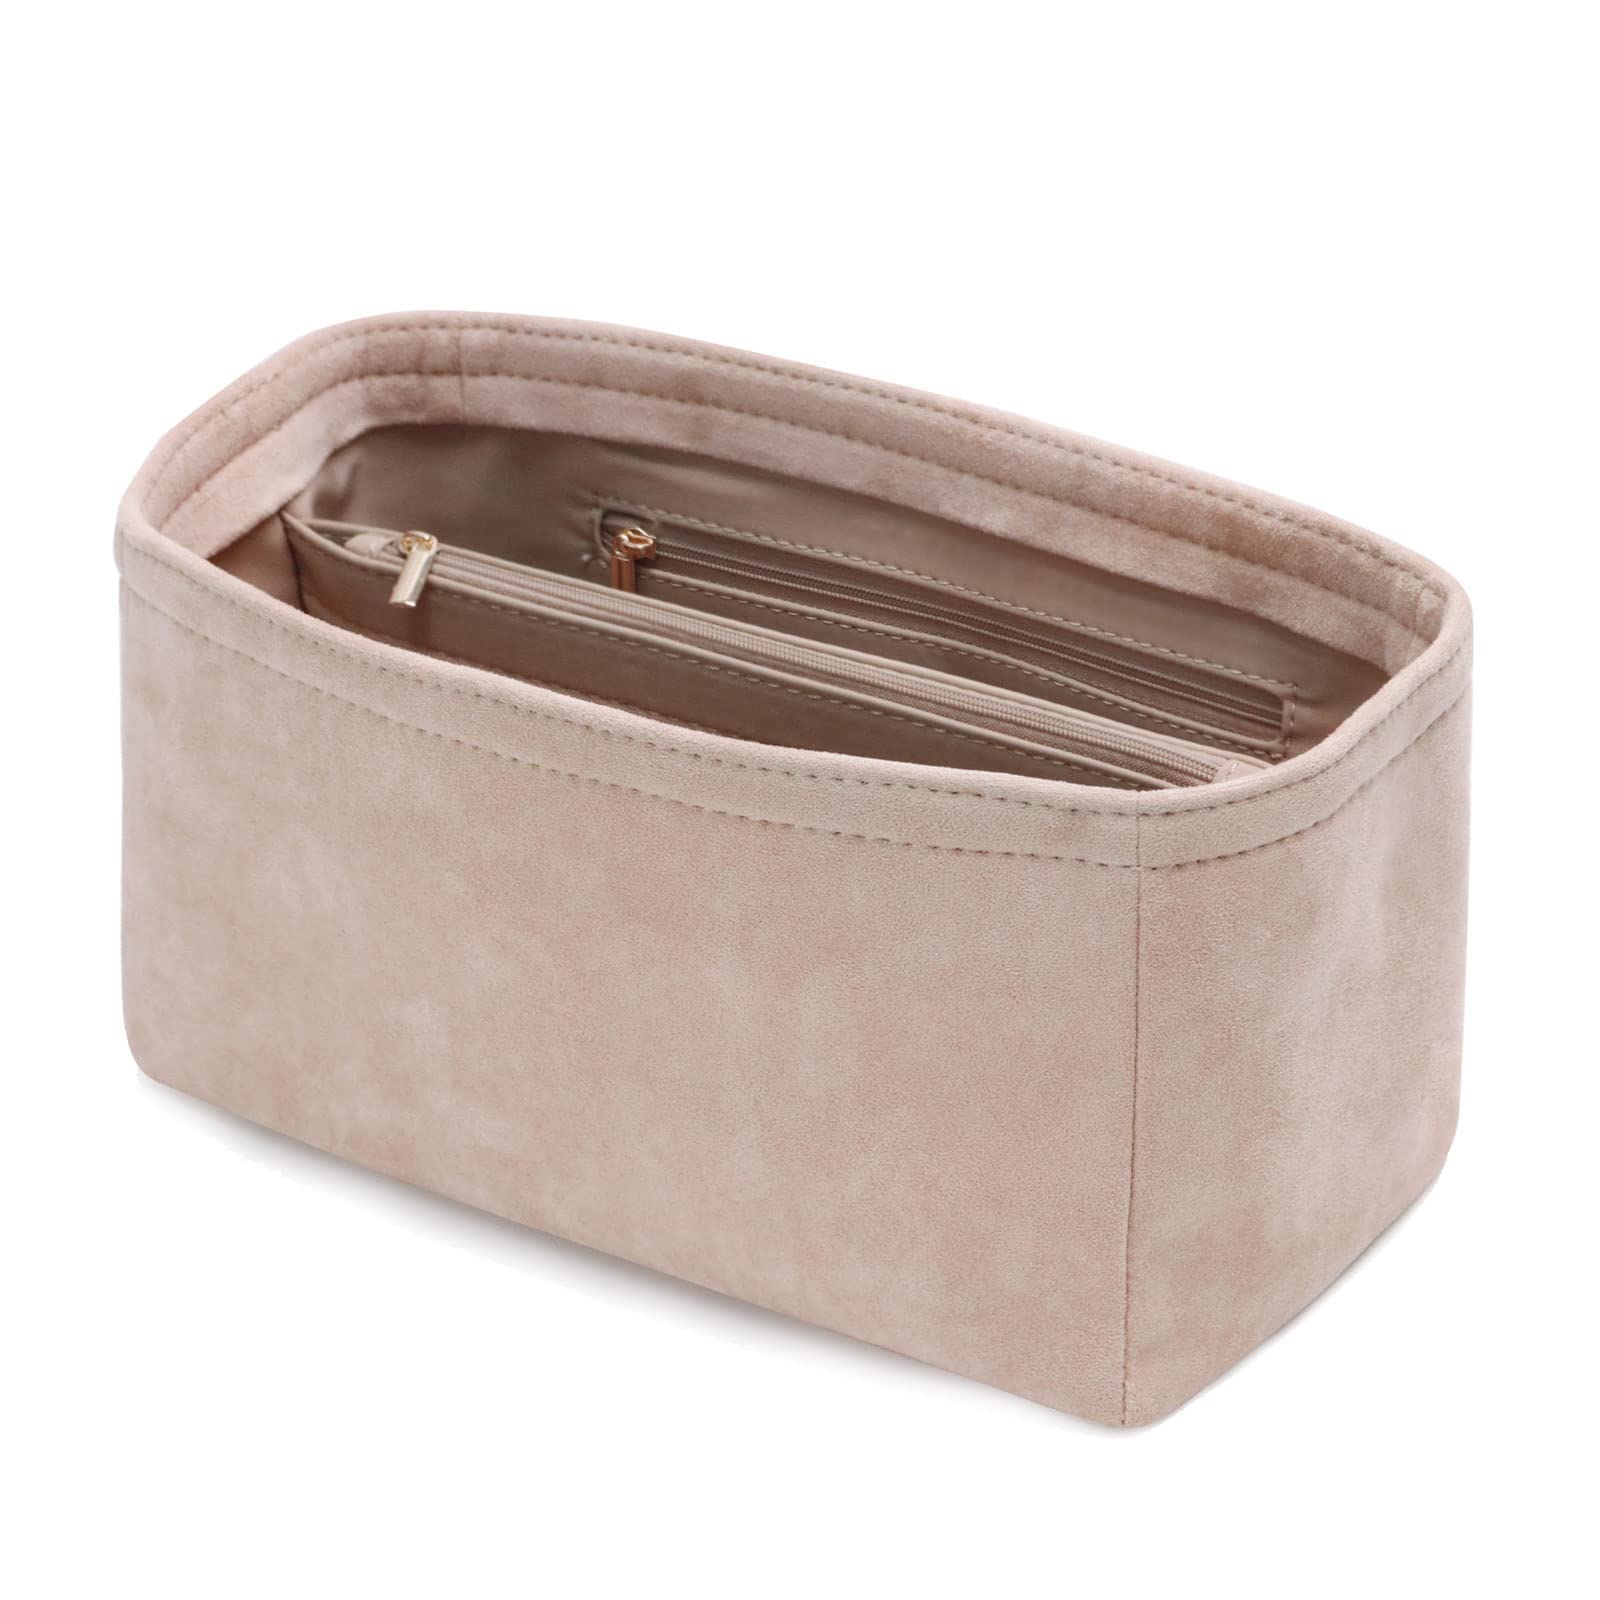 Neverfull PM / MM / GM Suedette Regular Style Leather Handbag Organizer  (Beige) (More Colors Available)